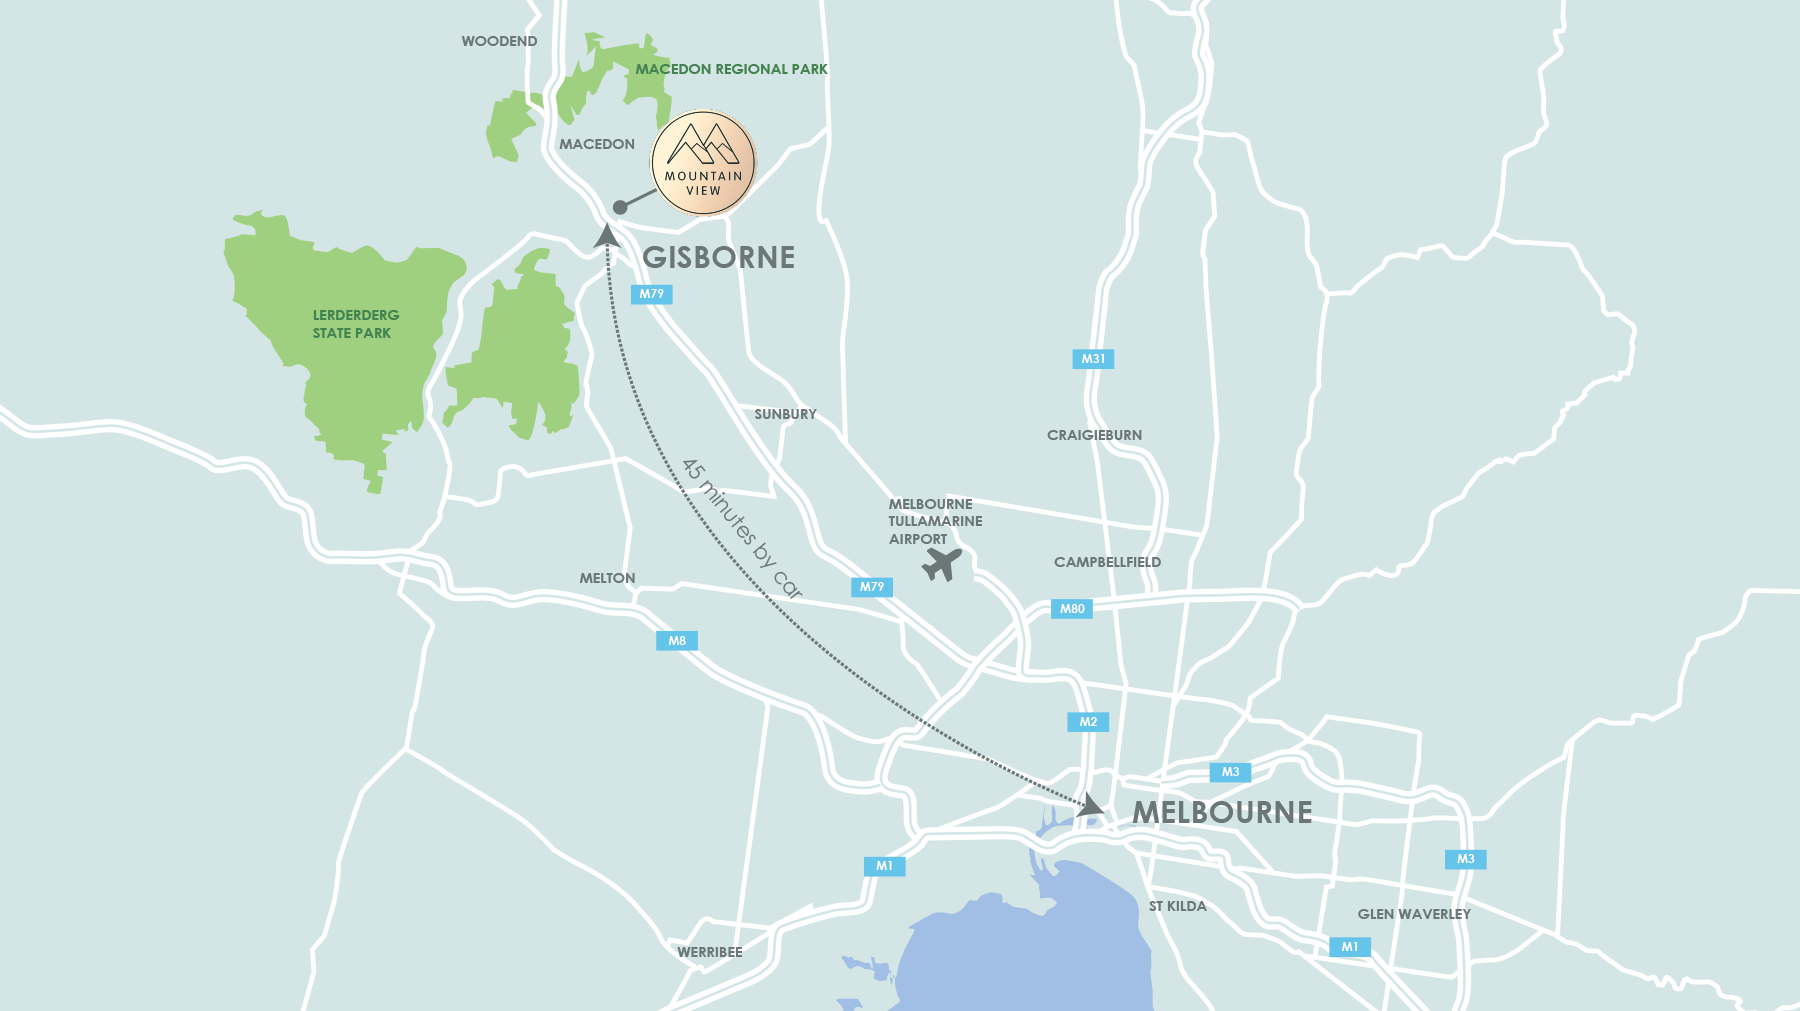 MOUNTAIN VIEW and Melbourne area location map